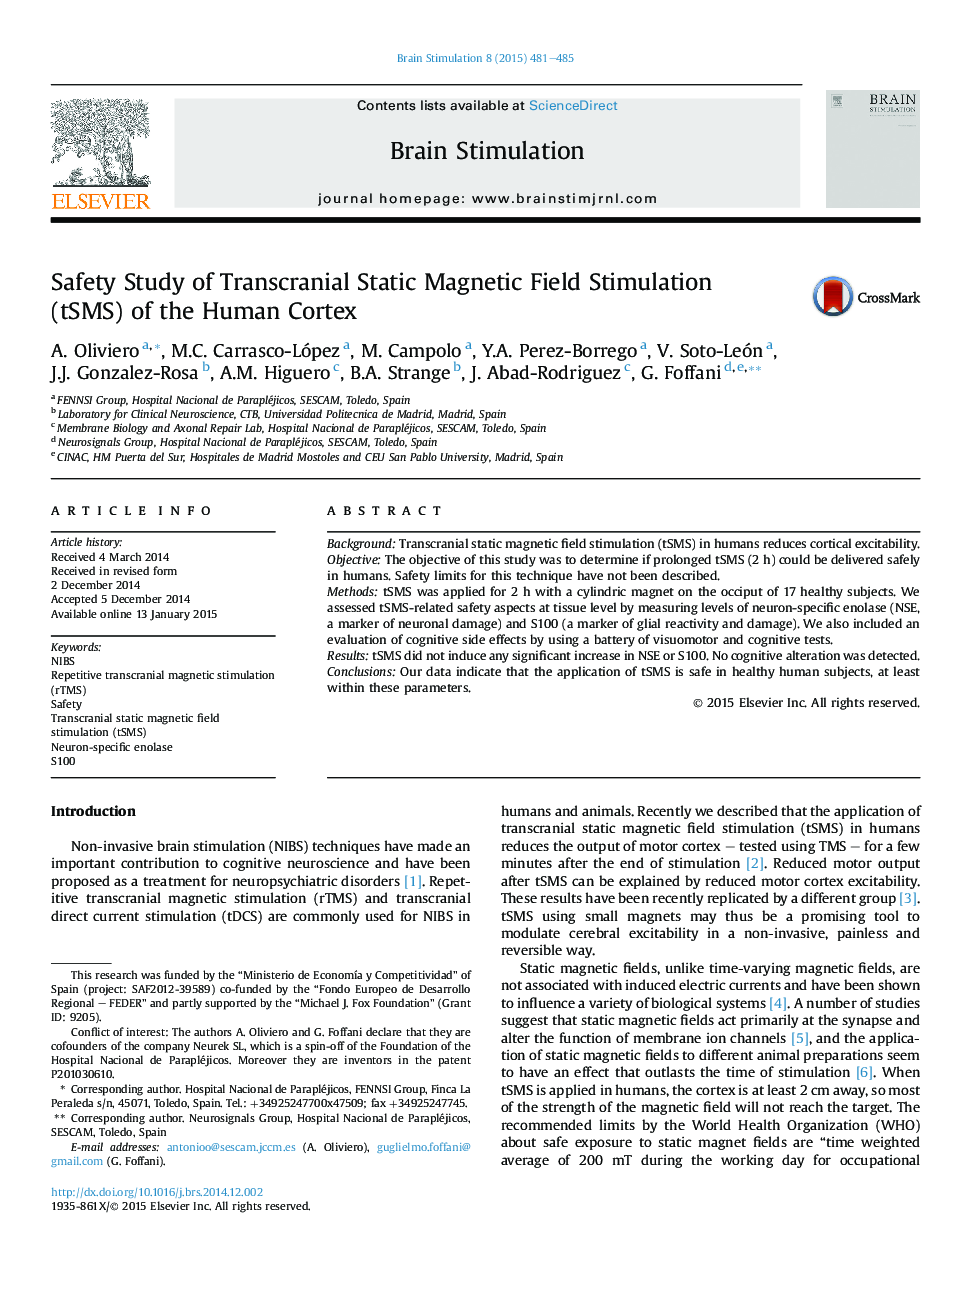 Safety Study of Transcranial Static Magnetic Field Stimulation (tSMS) of the Human Cortex